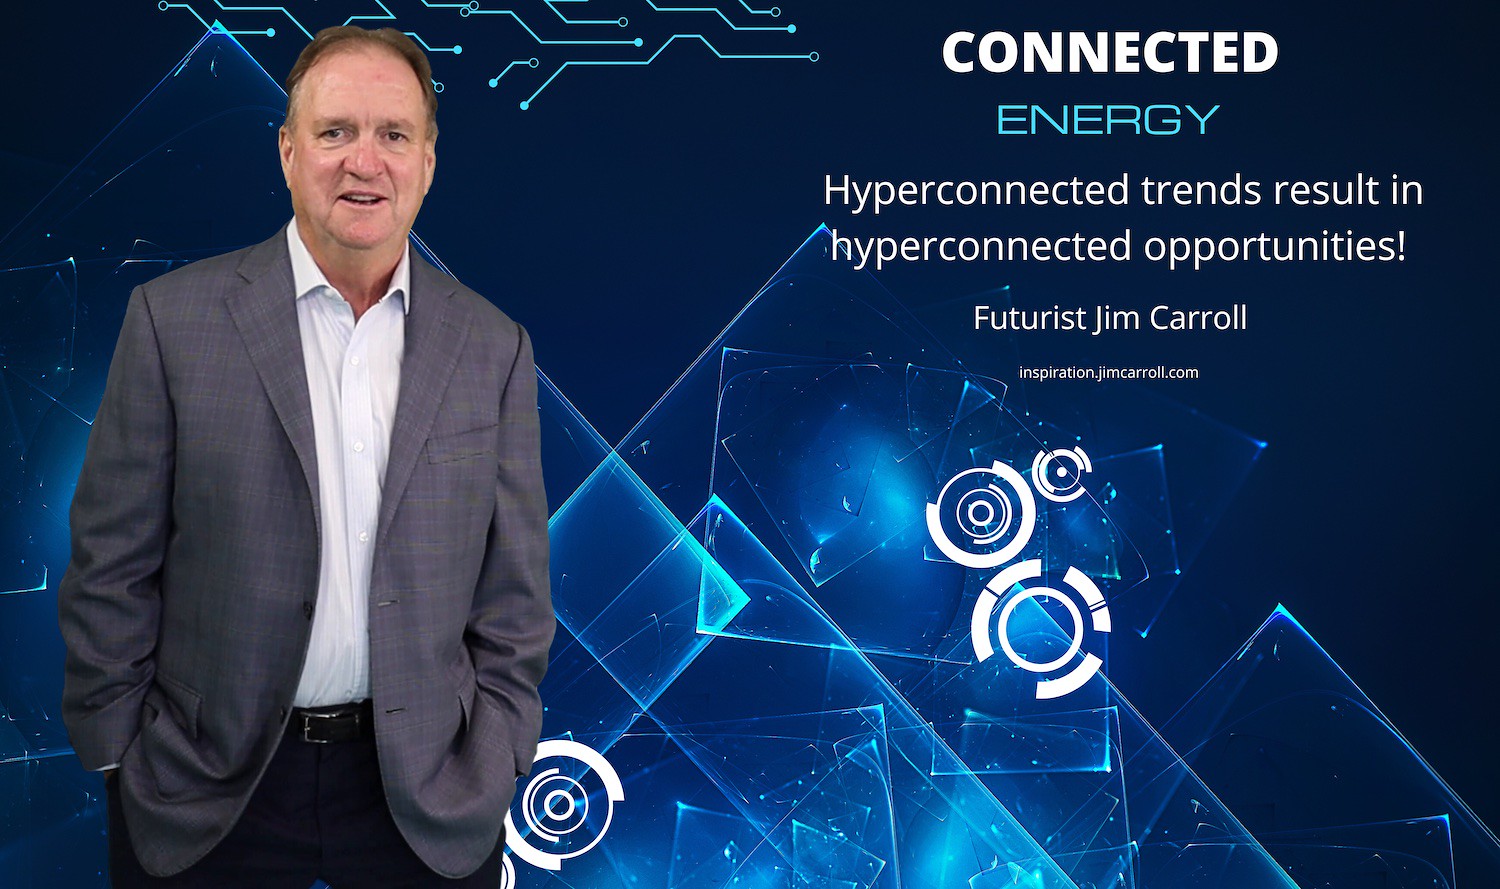 "Hyperconnected trends result in hyperconnected opportunities!" - Futurist Jim Carroll